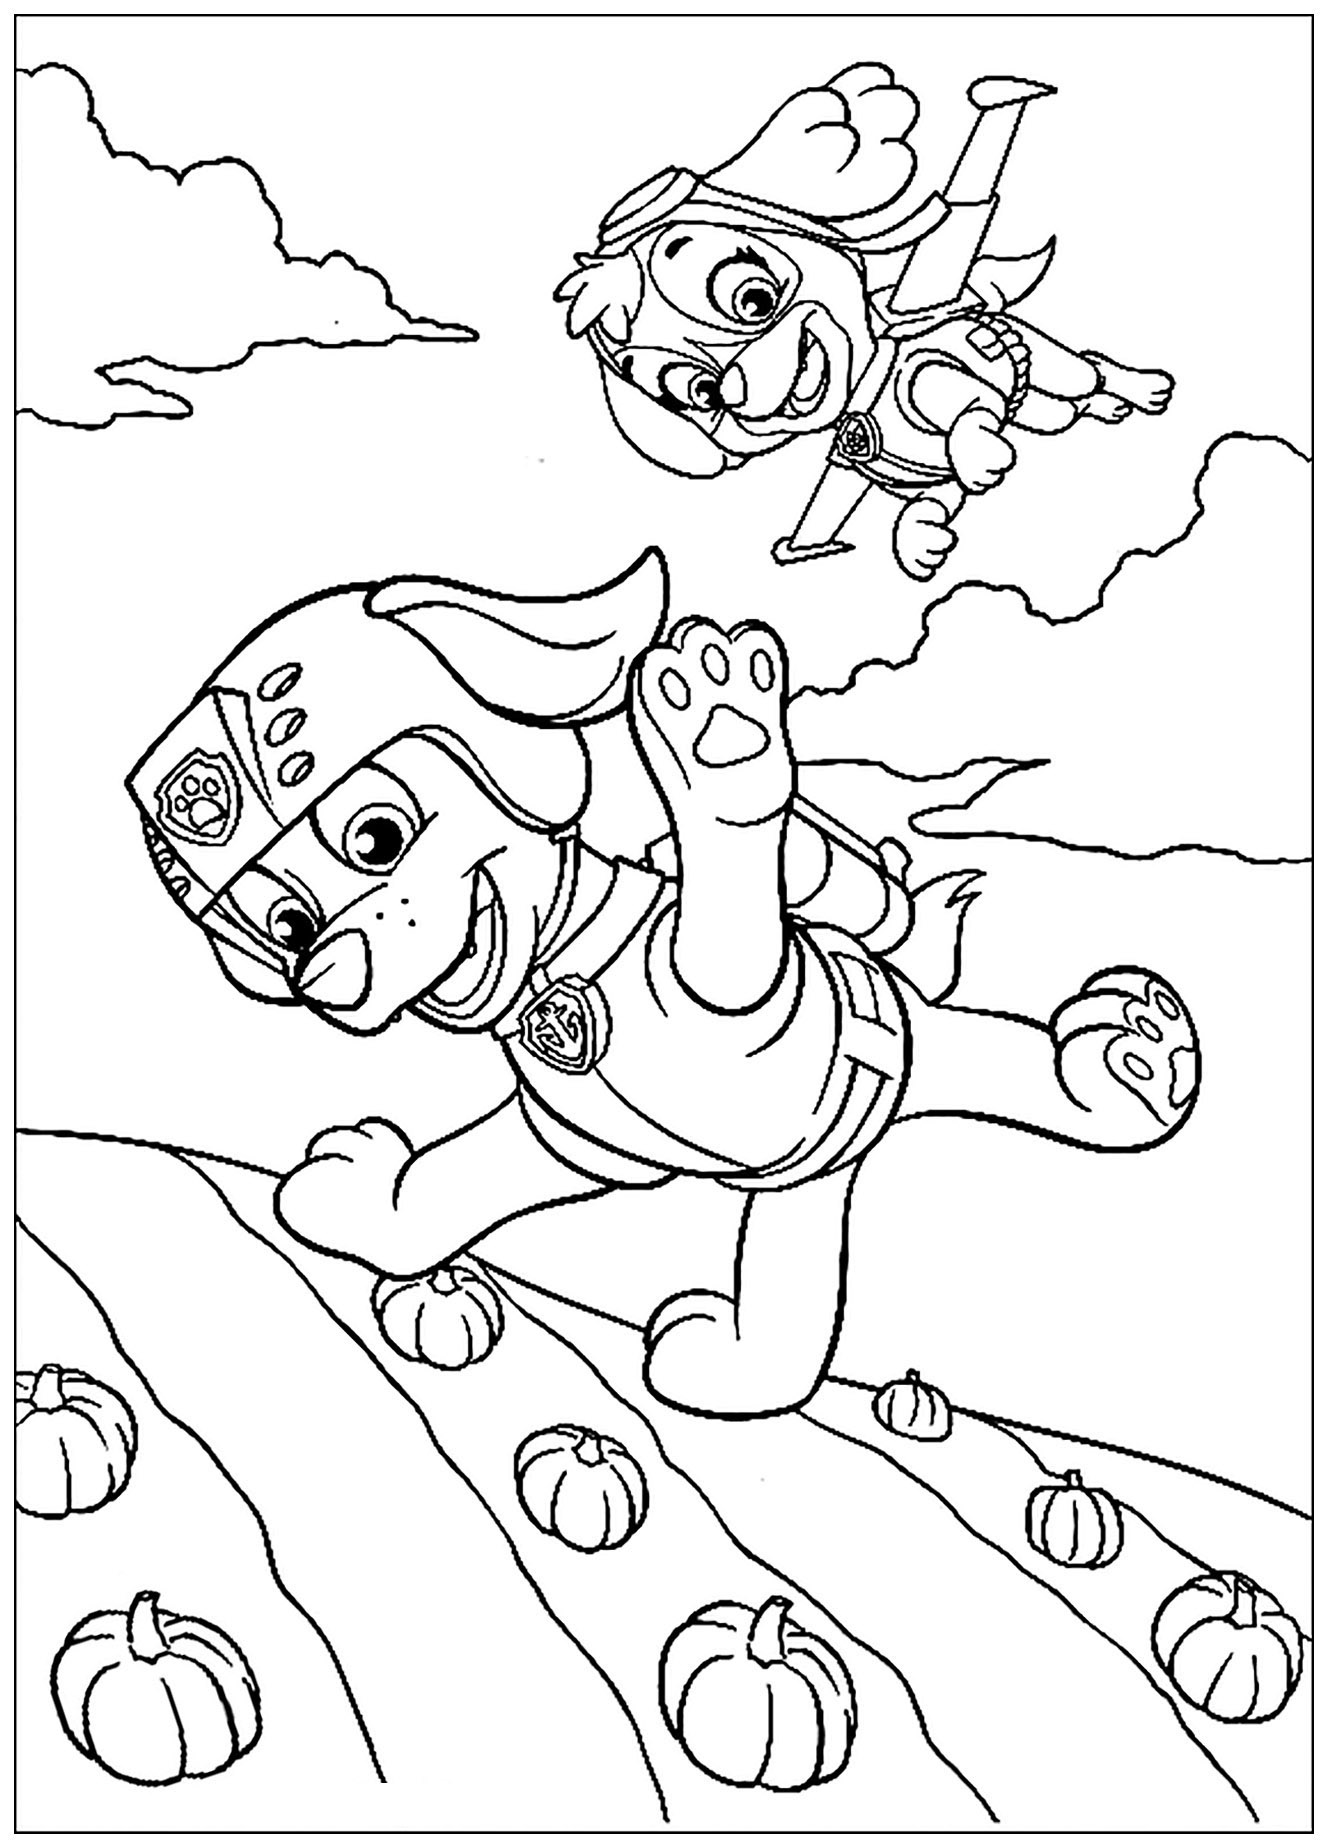 Beautiful Patrol coloring pages, simple, for children: Parachute